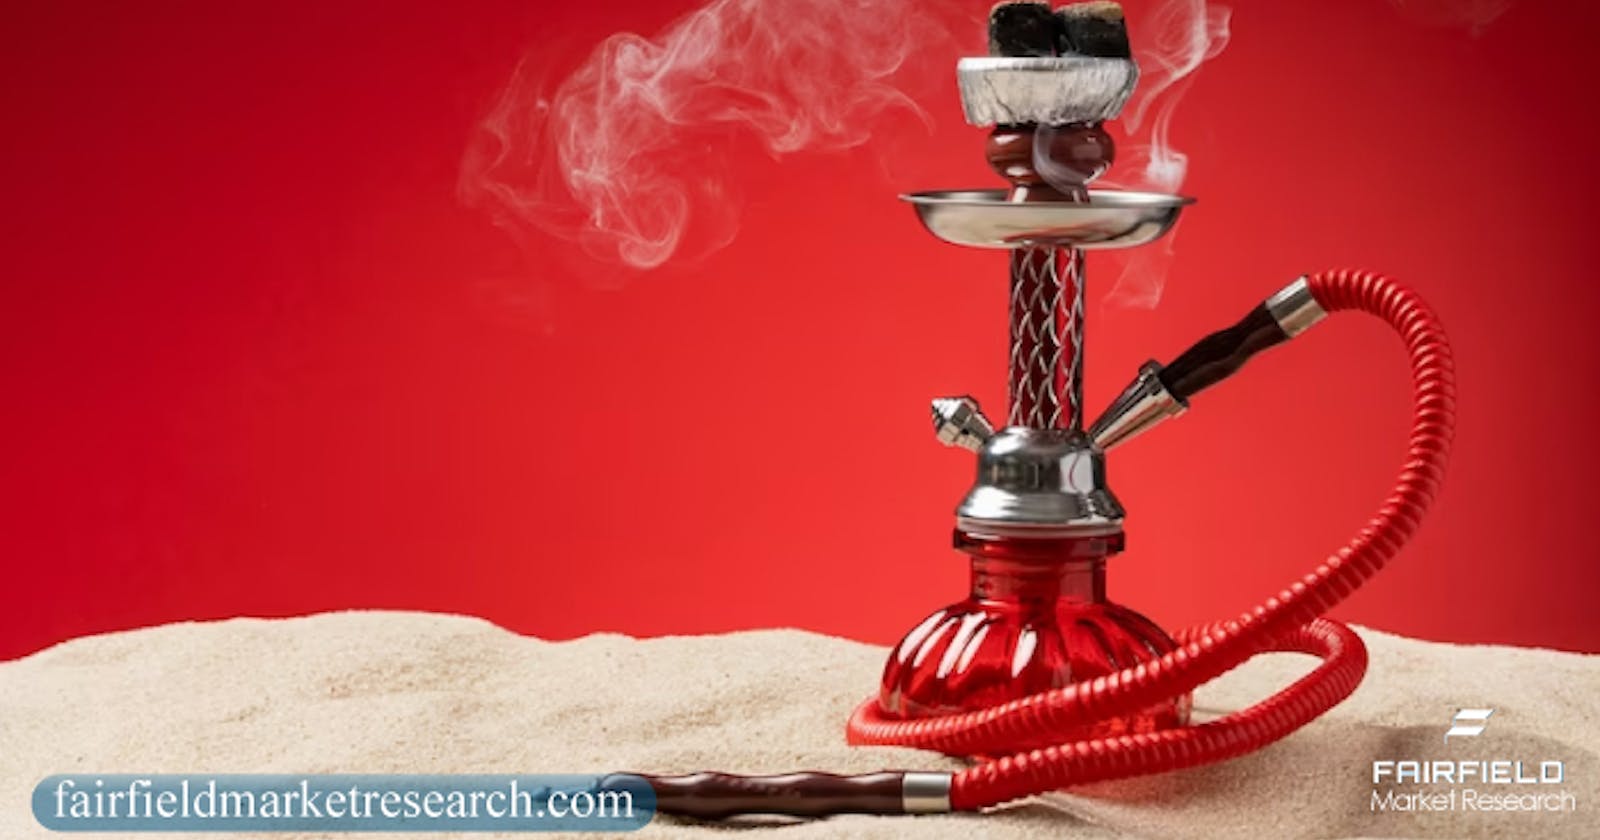 Global Shisha Market Poised for Exceptional Growth, Anticipates 6% CAGR with Revenue Surpassing US$2 Billion by 2030